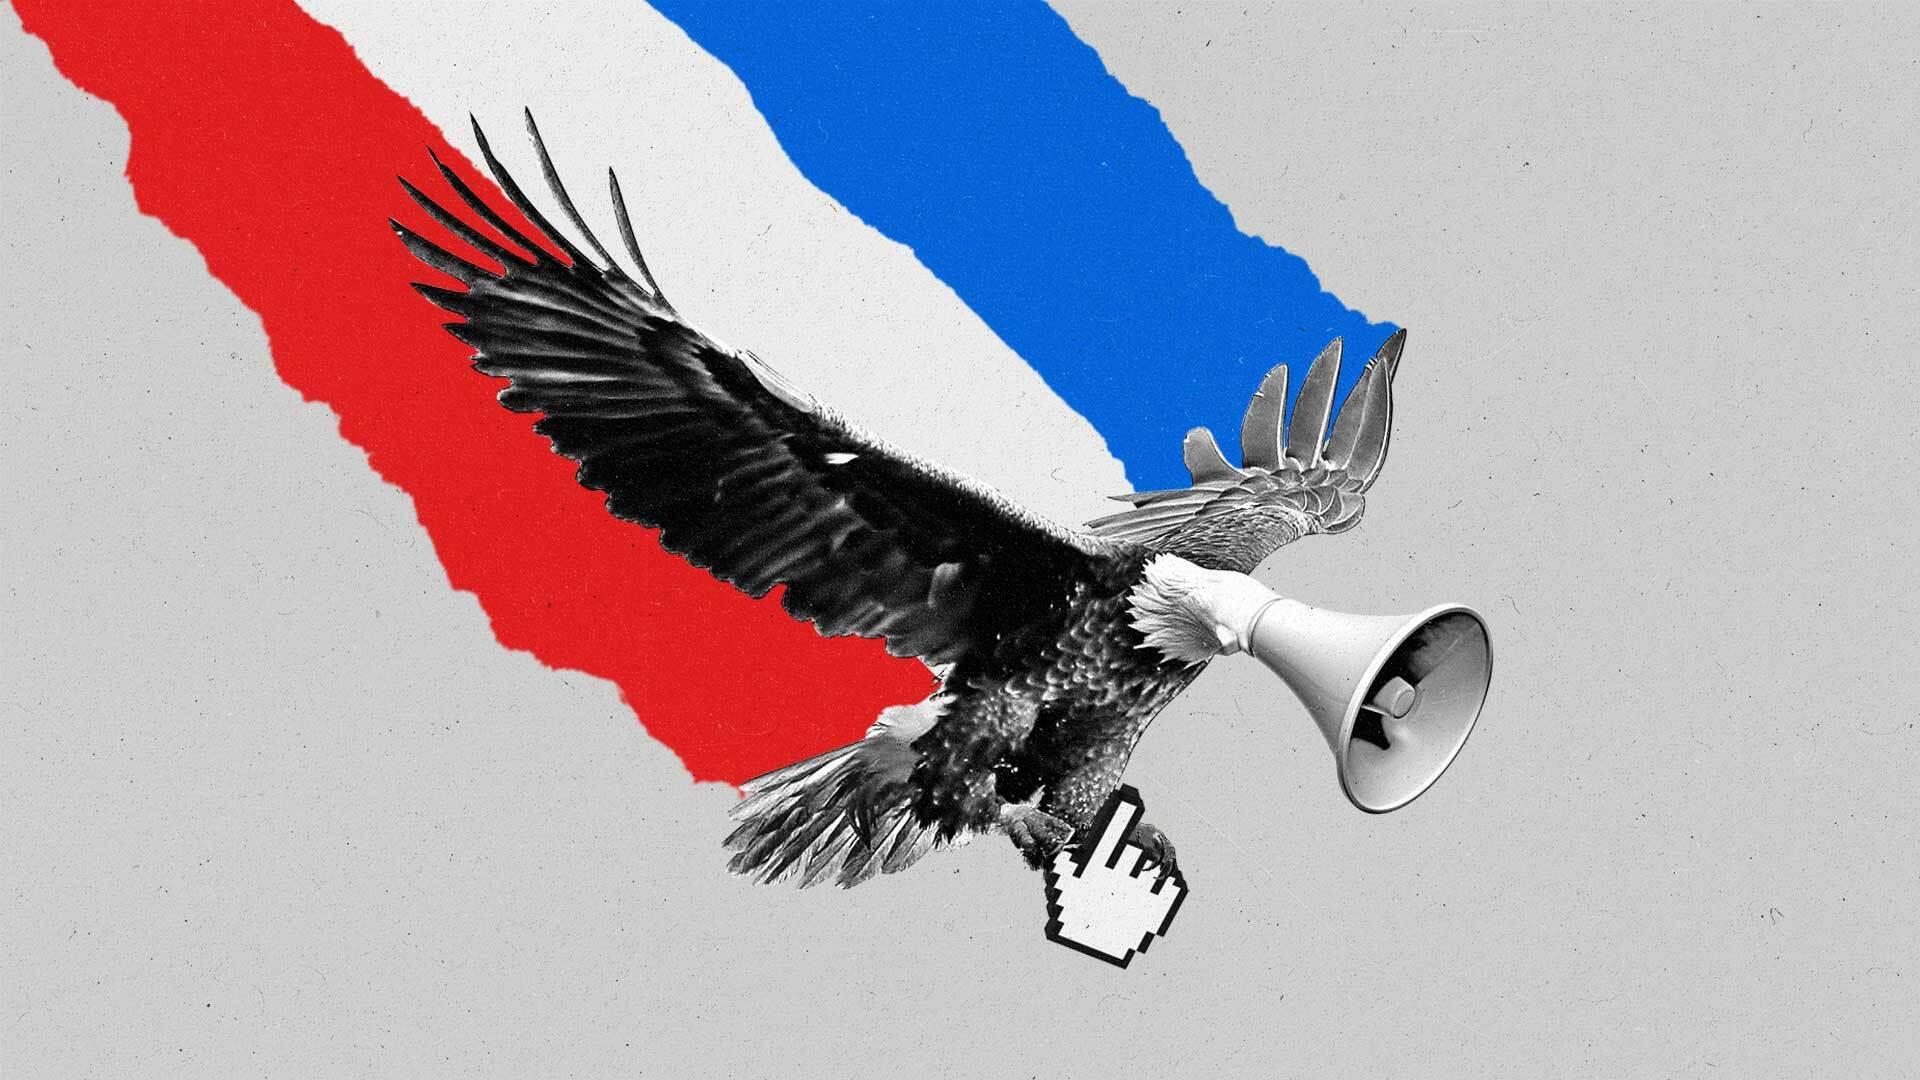 A bald eagle with a megaphone for a head carries a finger cursor as red, white and blue stripes follow it.